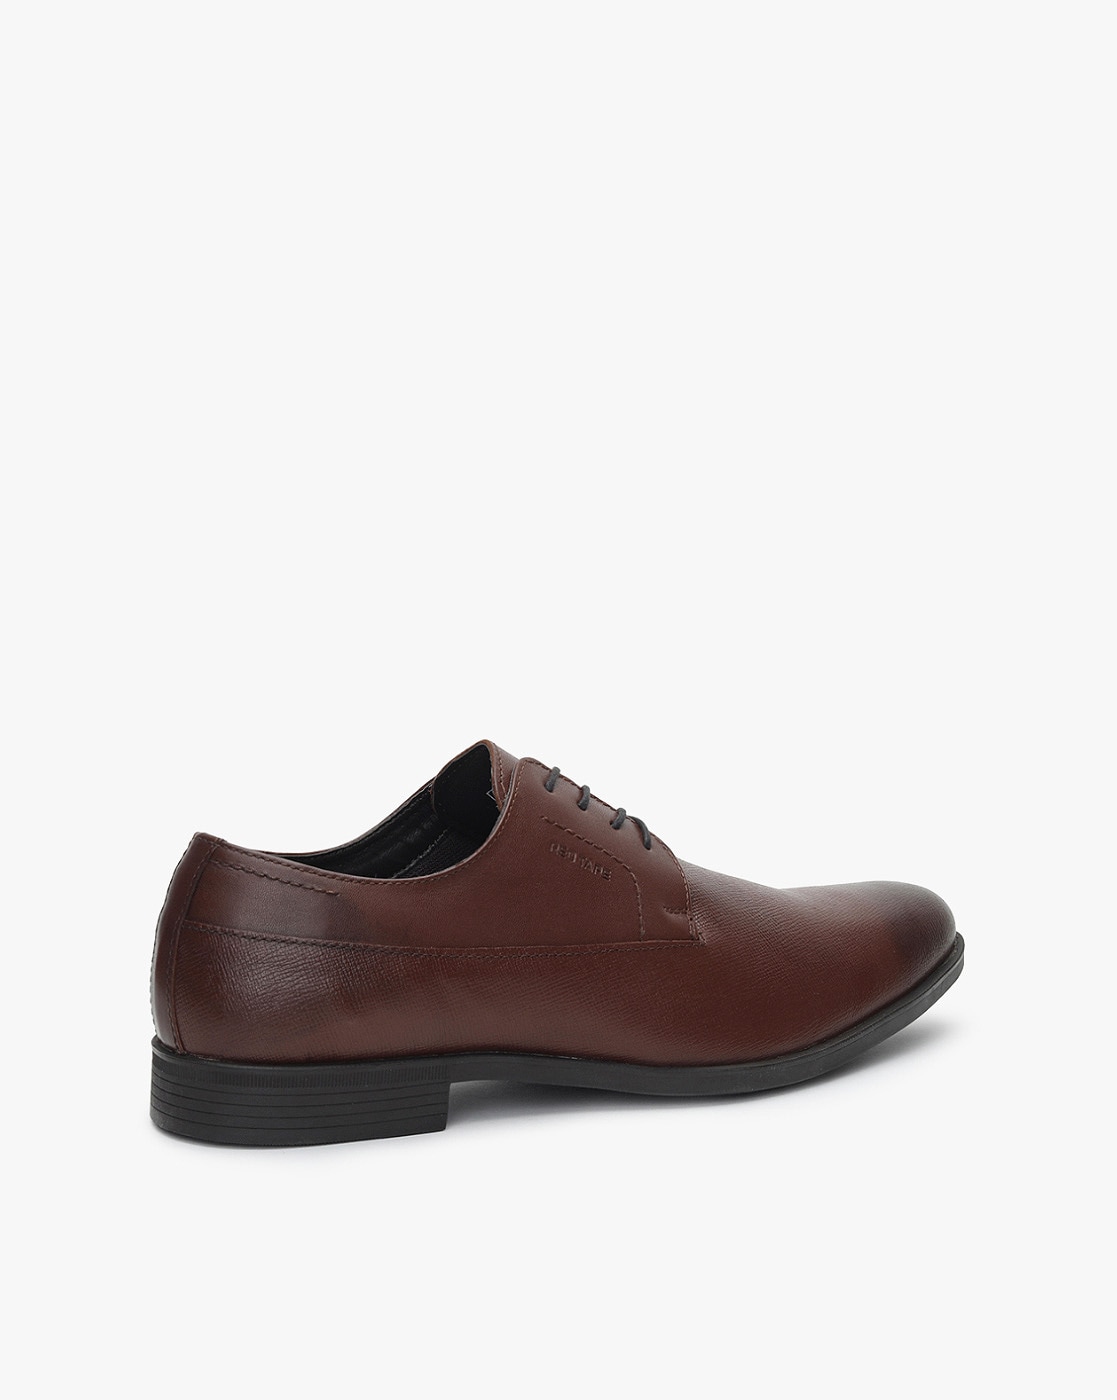 red tape leather shoes without laces